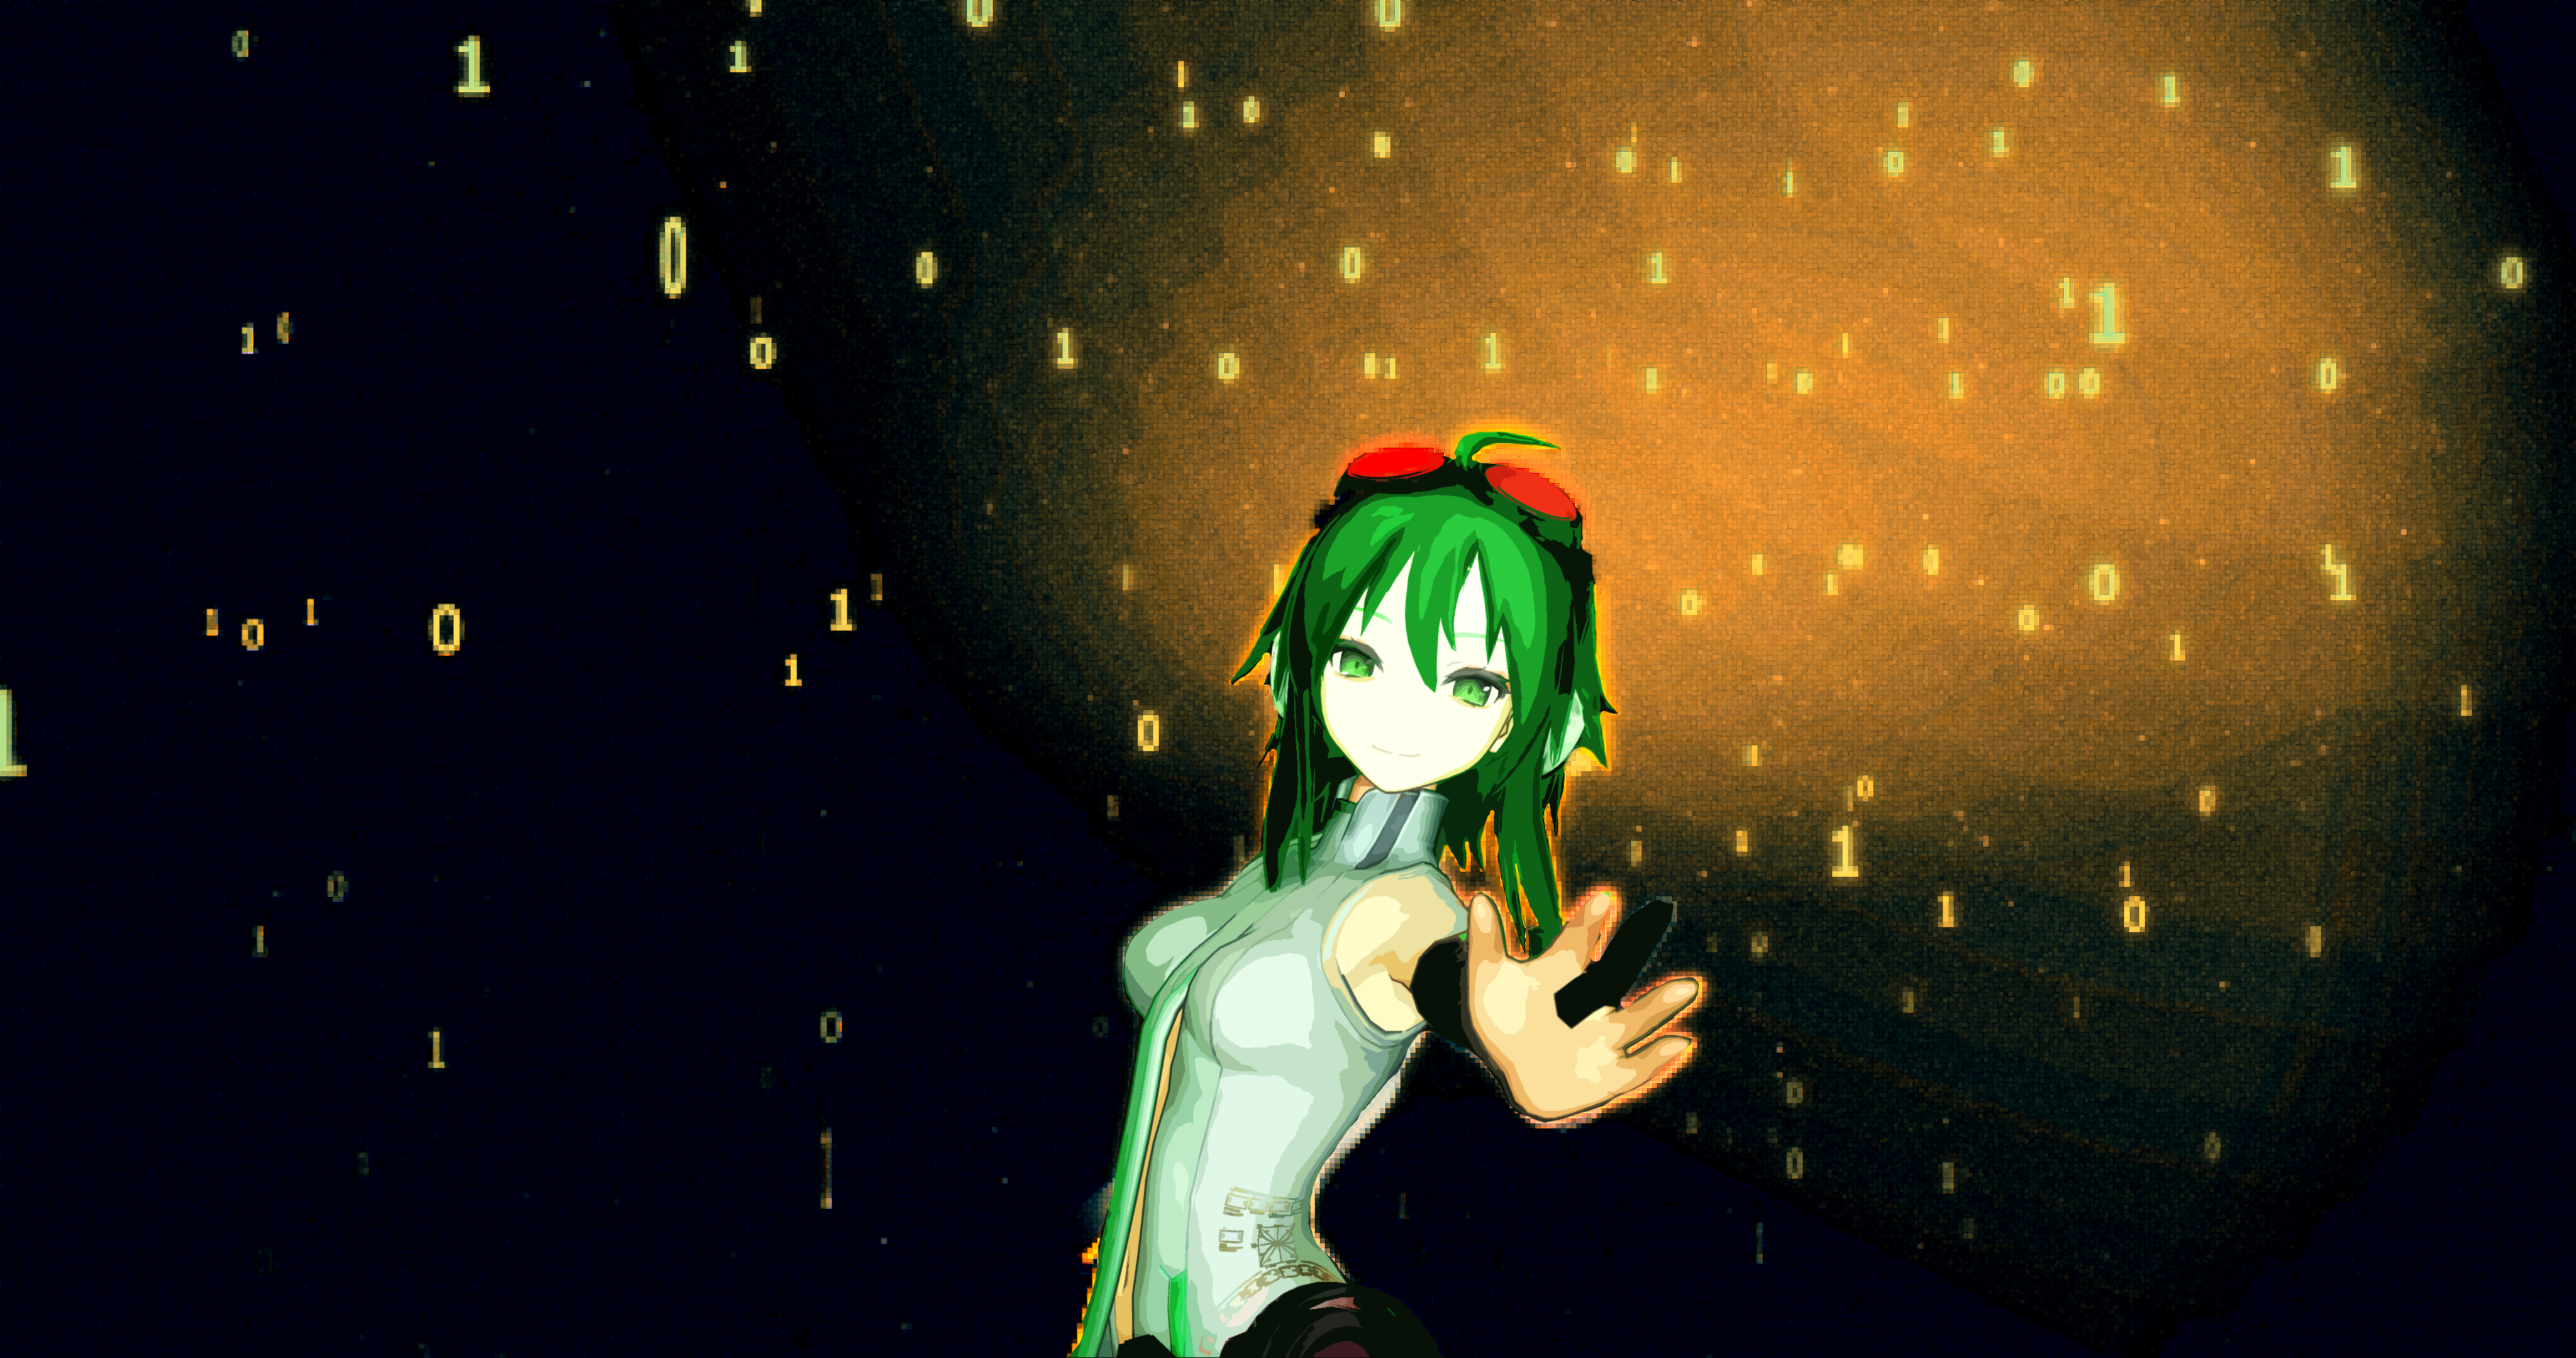 I got bored, and in my spare time I make wallpaper with MMD